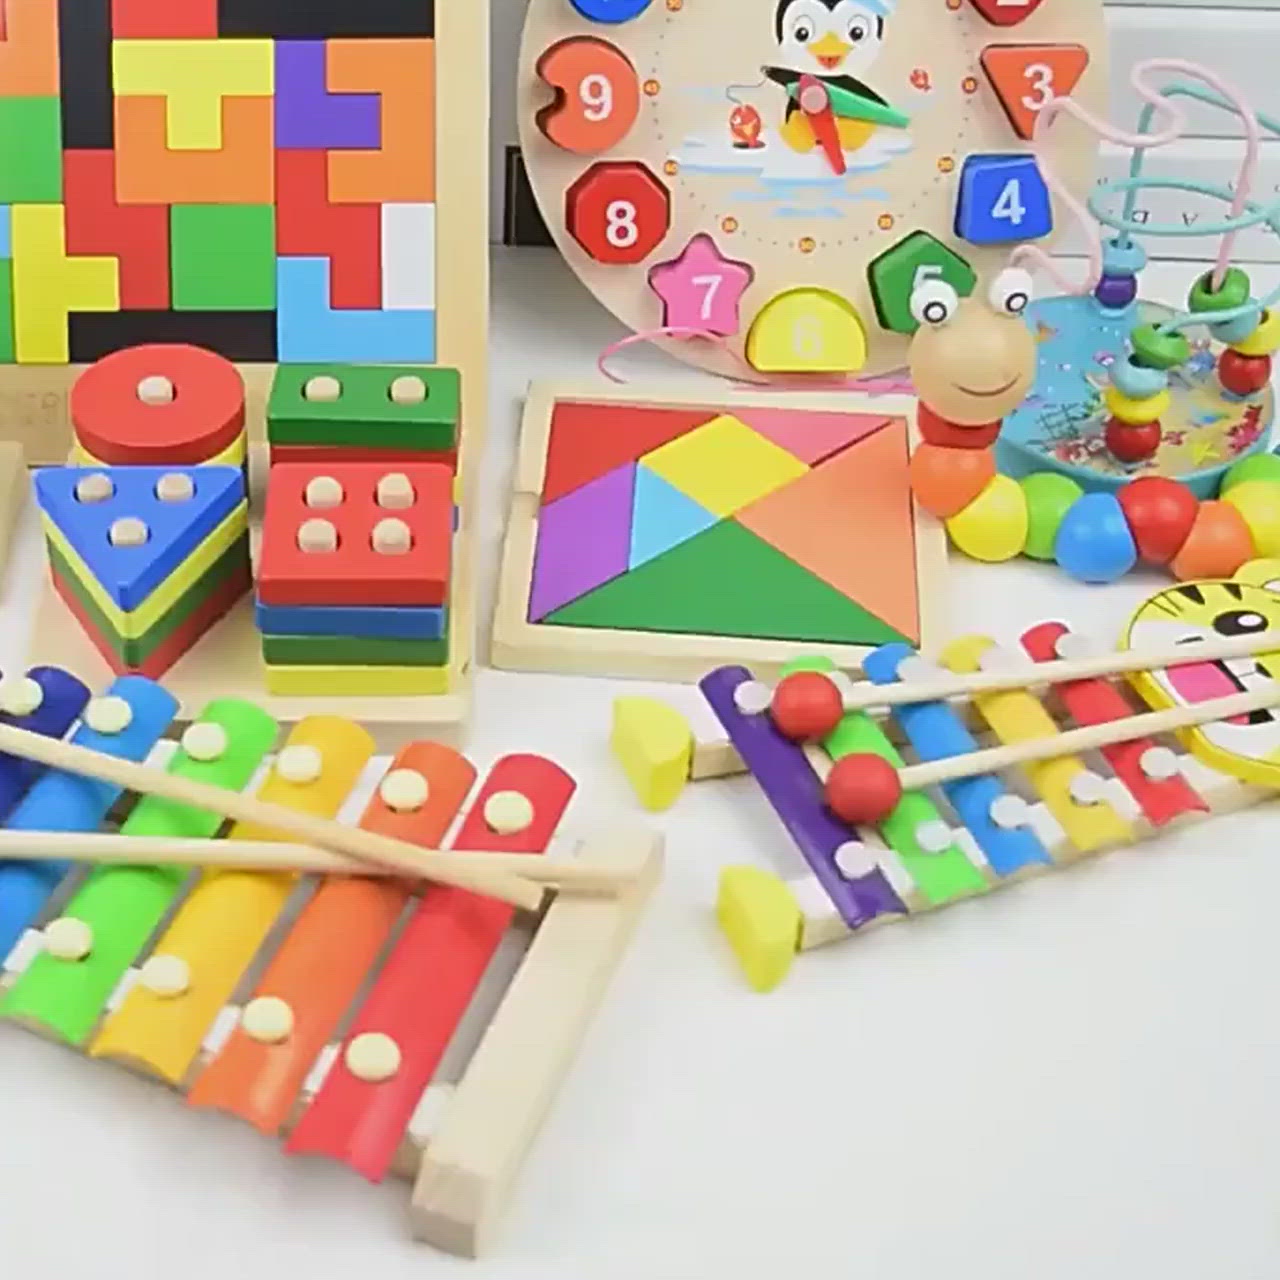 #217  Kids Montessori Wooden Toys Rainbow Blocks Kid Learning Toy Baby Music Rattles Graphic Colorful Wooden Blocks Educational Toy